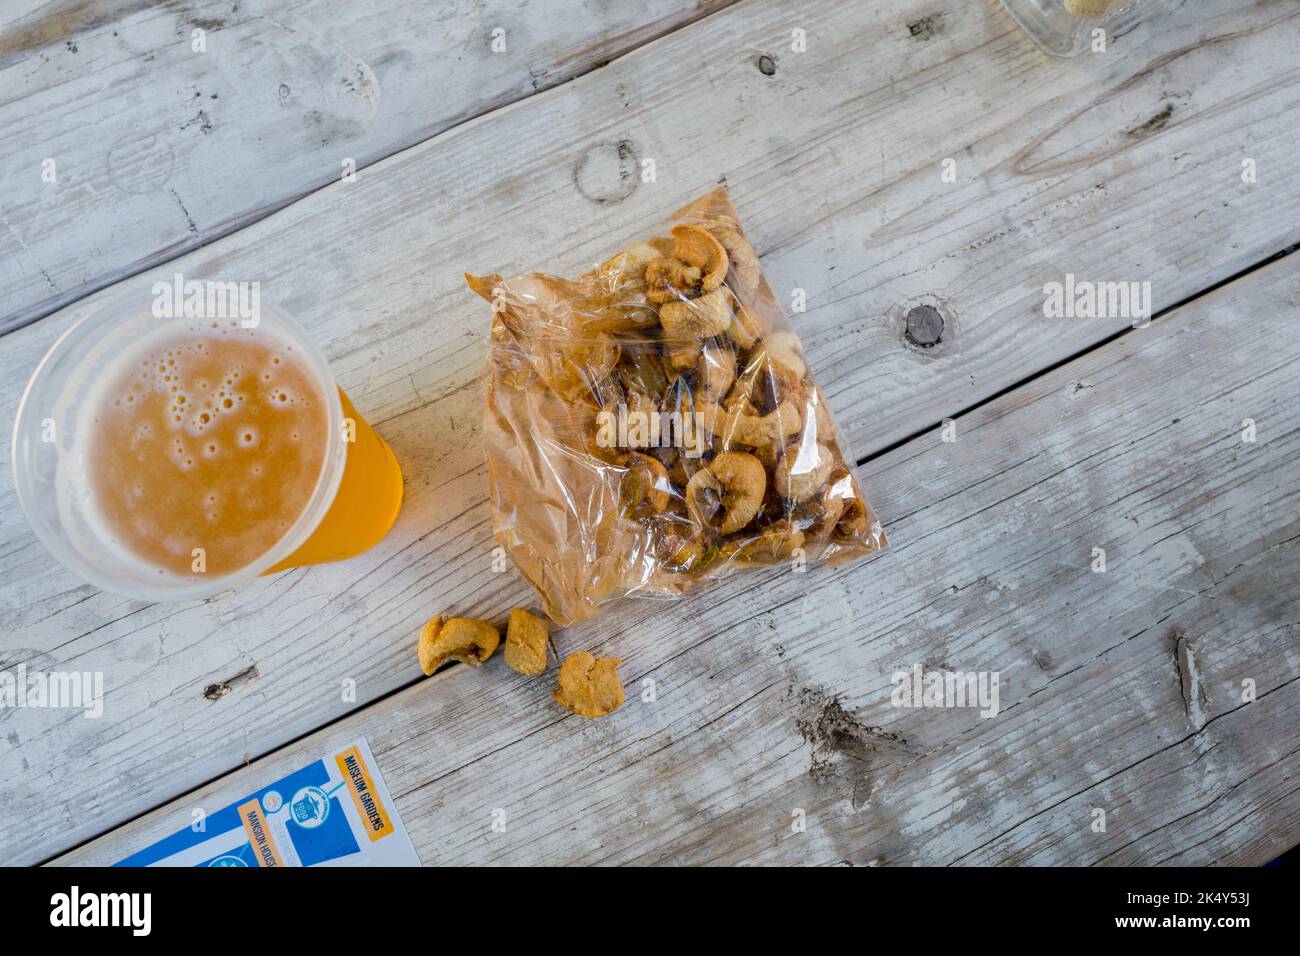 Pint of beer in a plastic container and an open bag of pork cracklings or scratchings outside on a wooden bench. Stock Photo